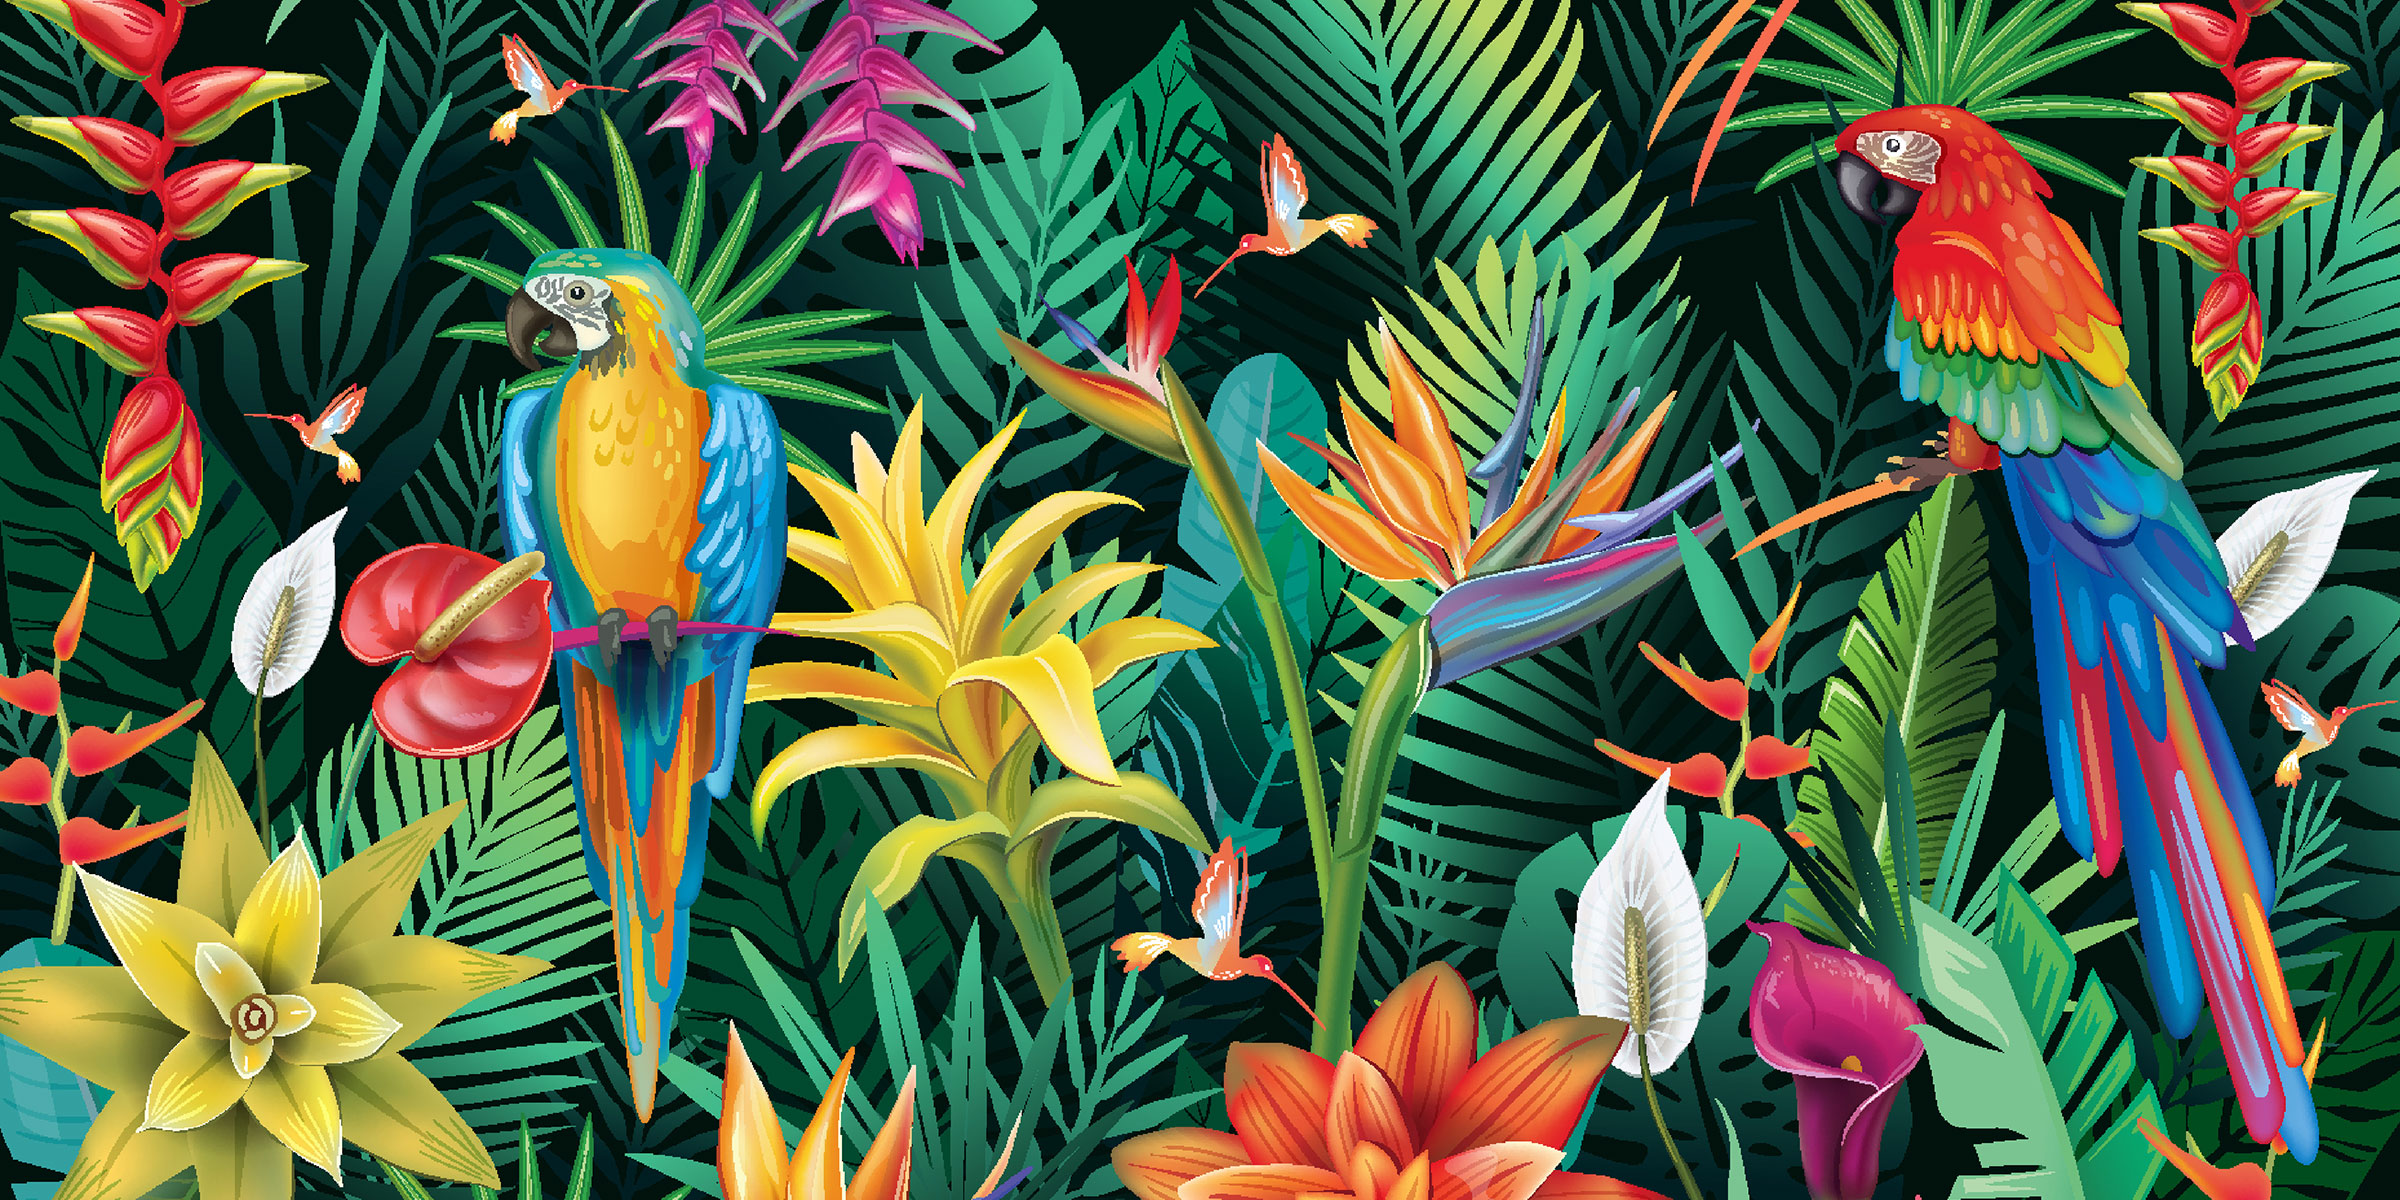 Colorful painting of tropical flowers, leaves, and birds